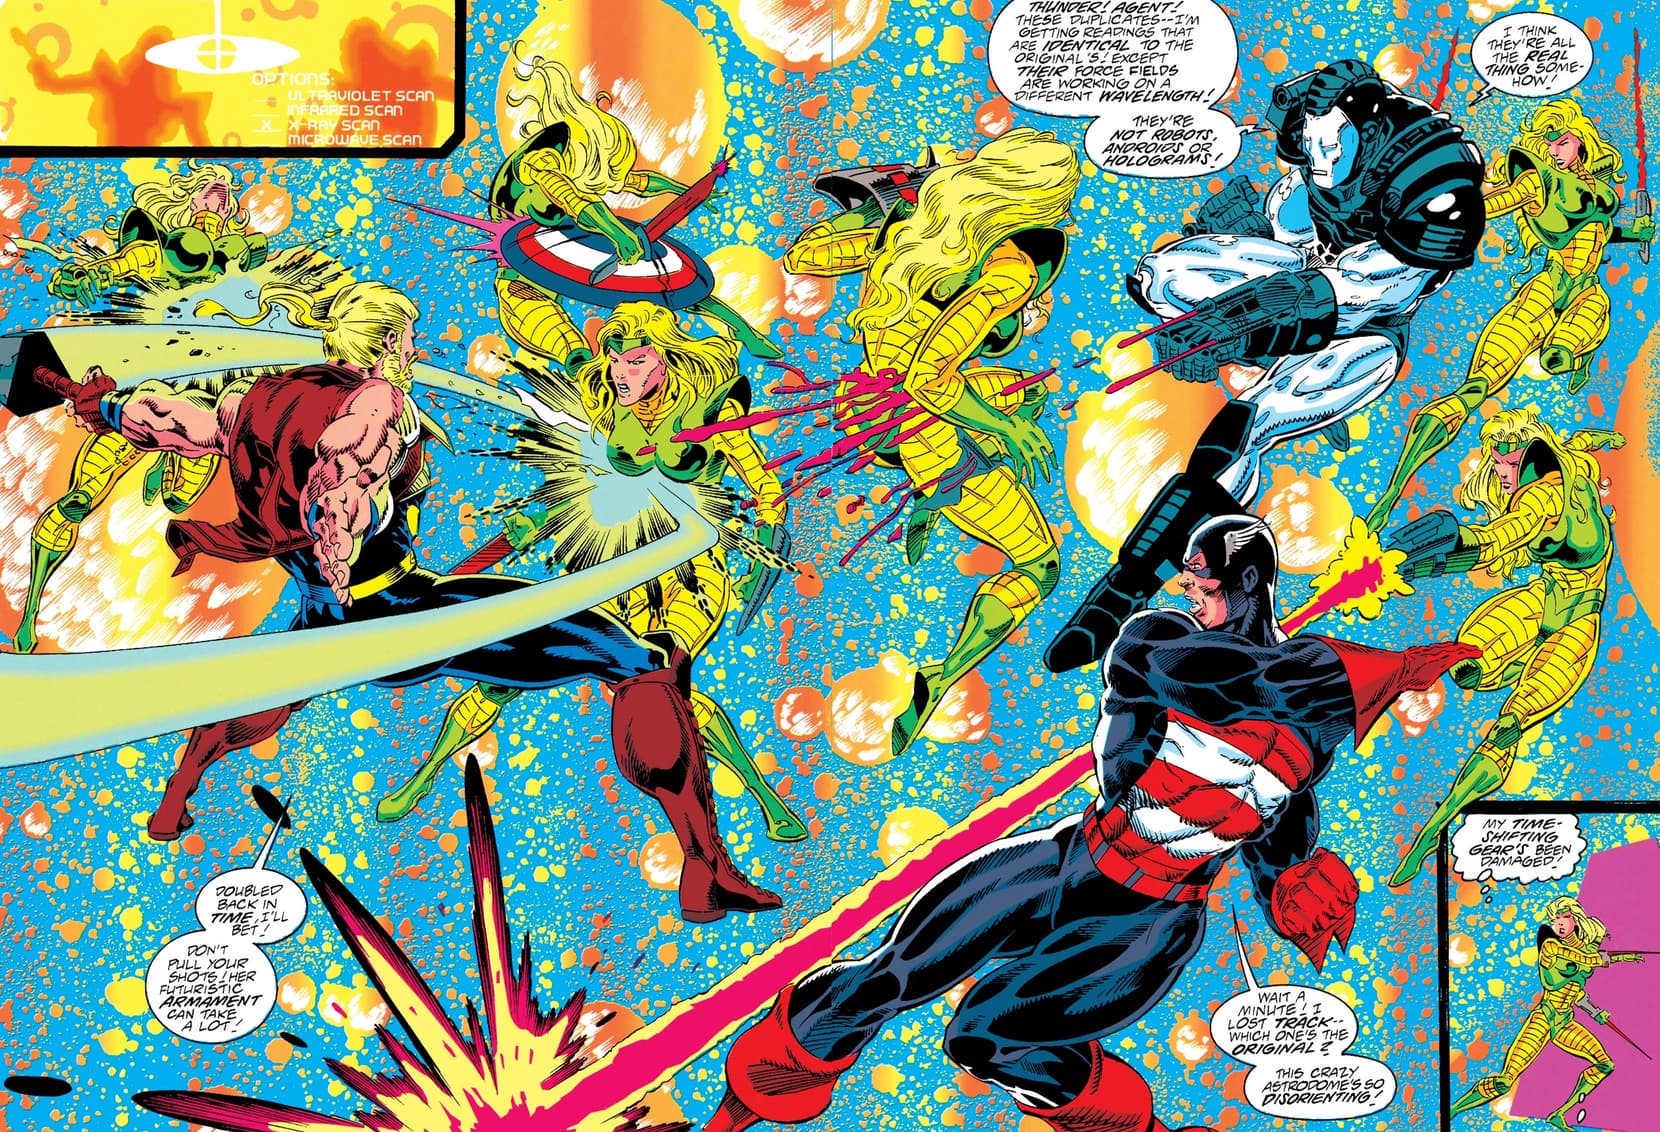 Ravonna fights the Avenger with time duplicates in AVENGERS: THE TERMINATRIX OBJECTIVE (1993) #1.